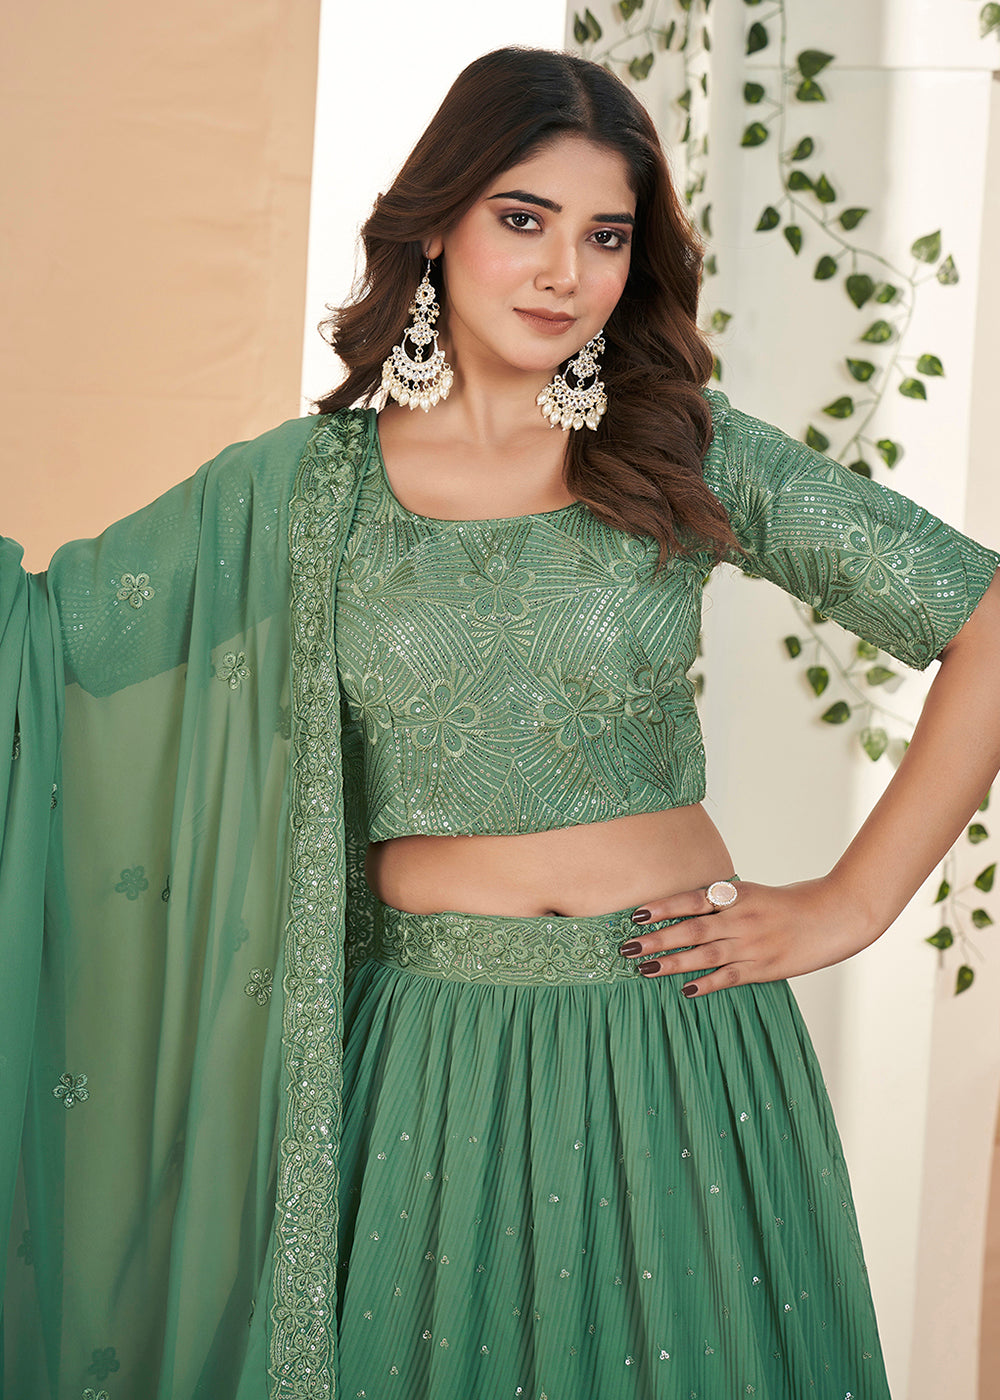 Buy Now Green Thread & Sequins Wedding Party Lehenga Choli Online in USA, UK, Canada & Worldwide at Empress Clothing. 